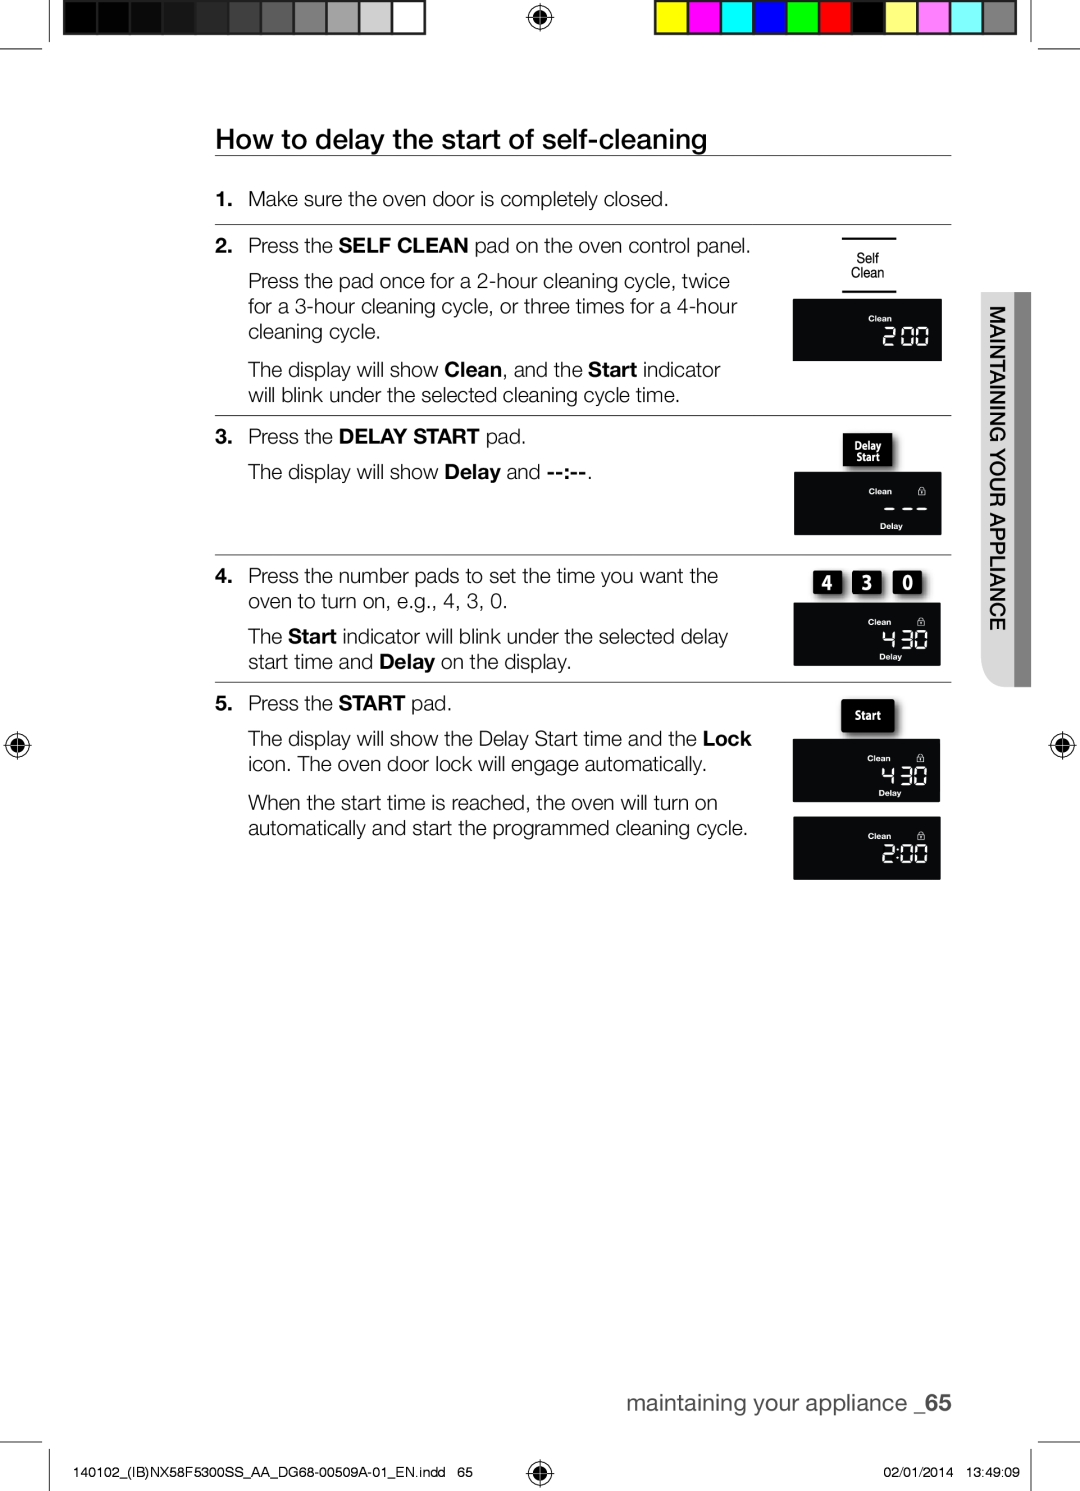 Samsung NX58F5500SW user manual How to delay the start of self-cleaning, maintaining your appliance 